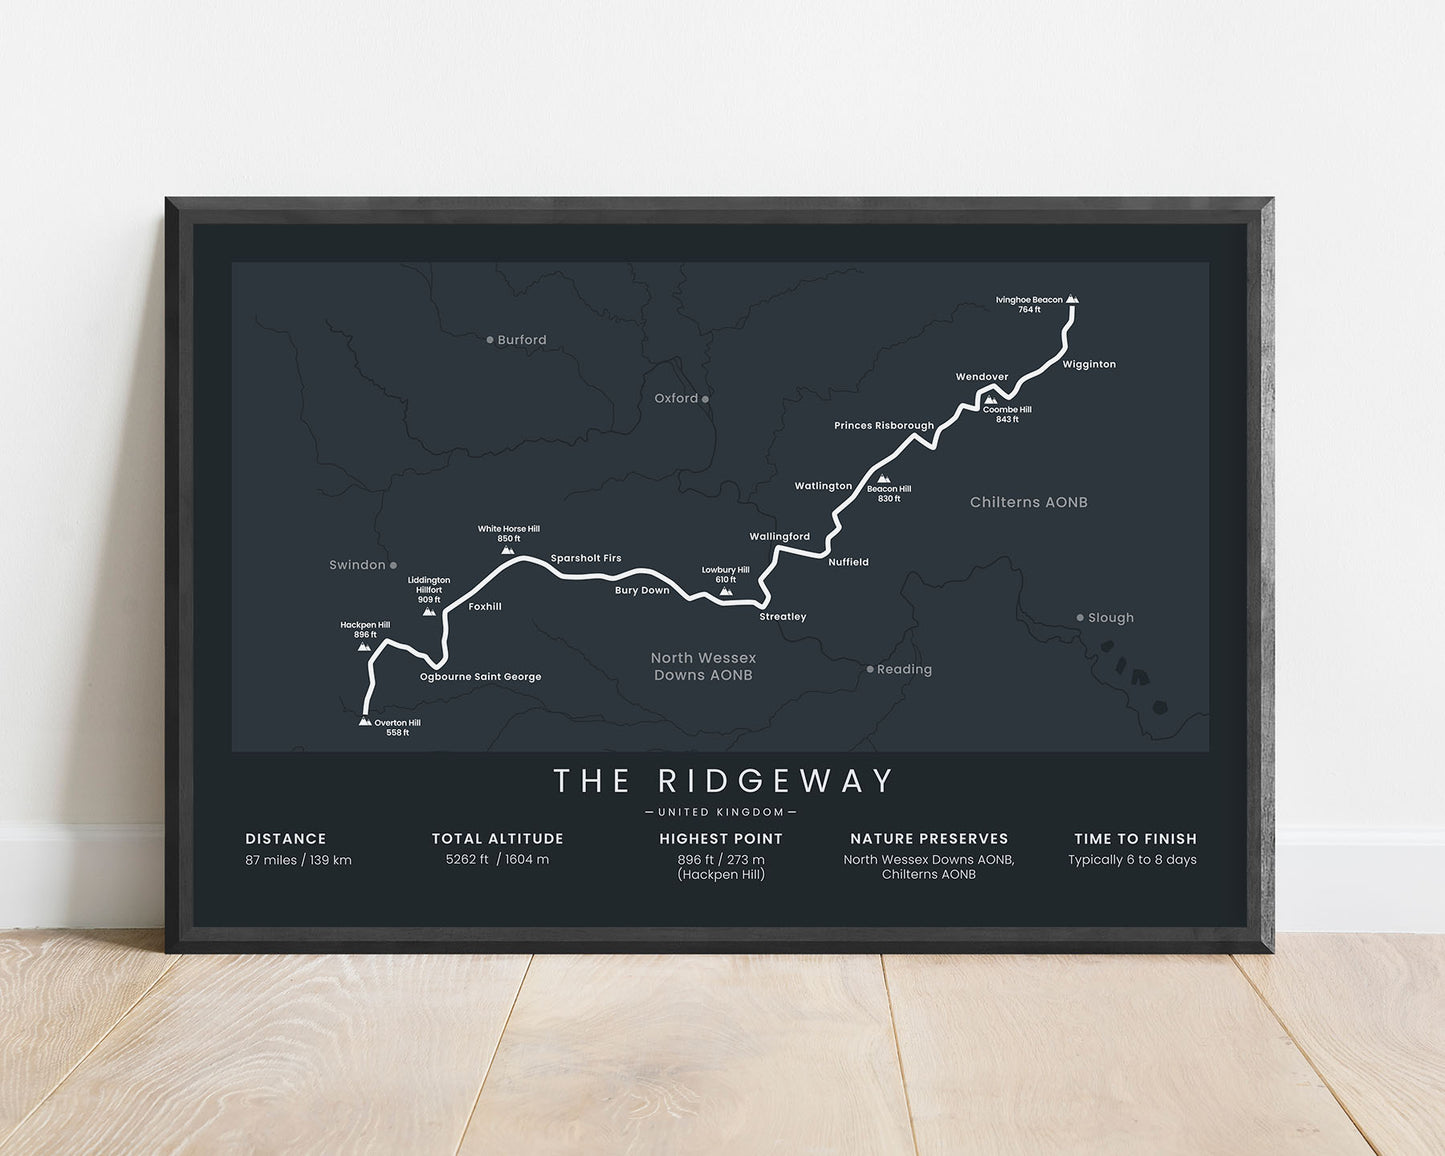 The Ridgeway National Trail (England) Path Wall Map with black background